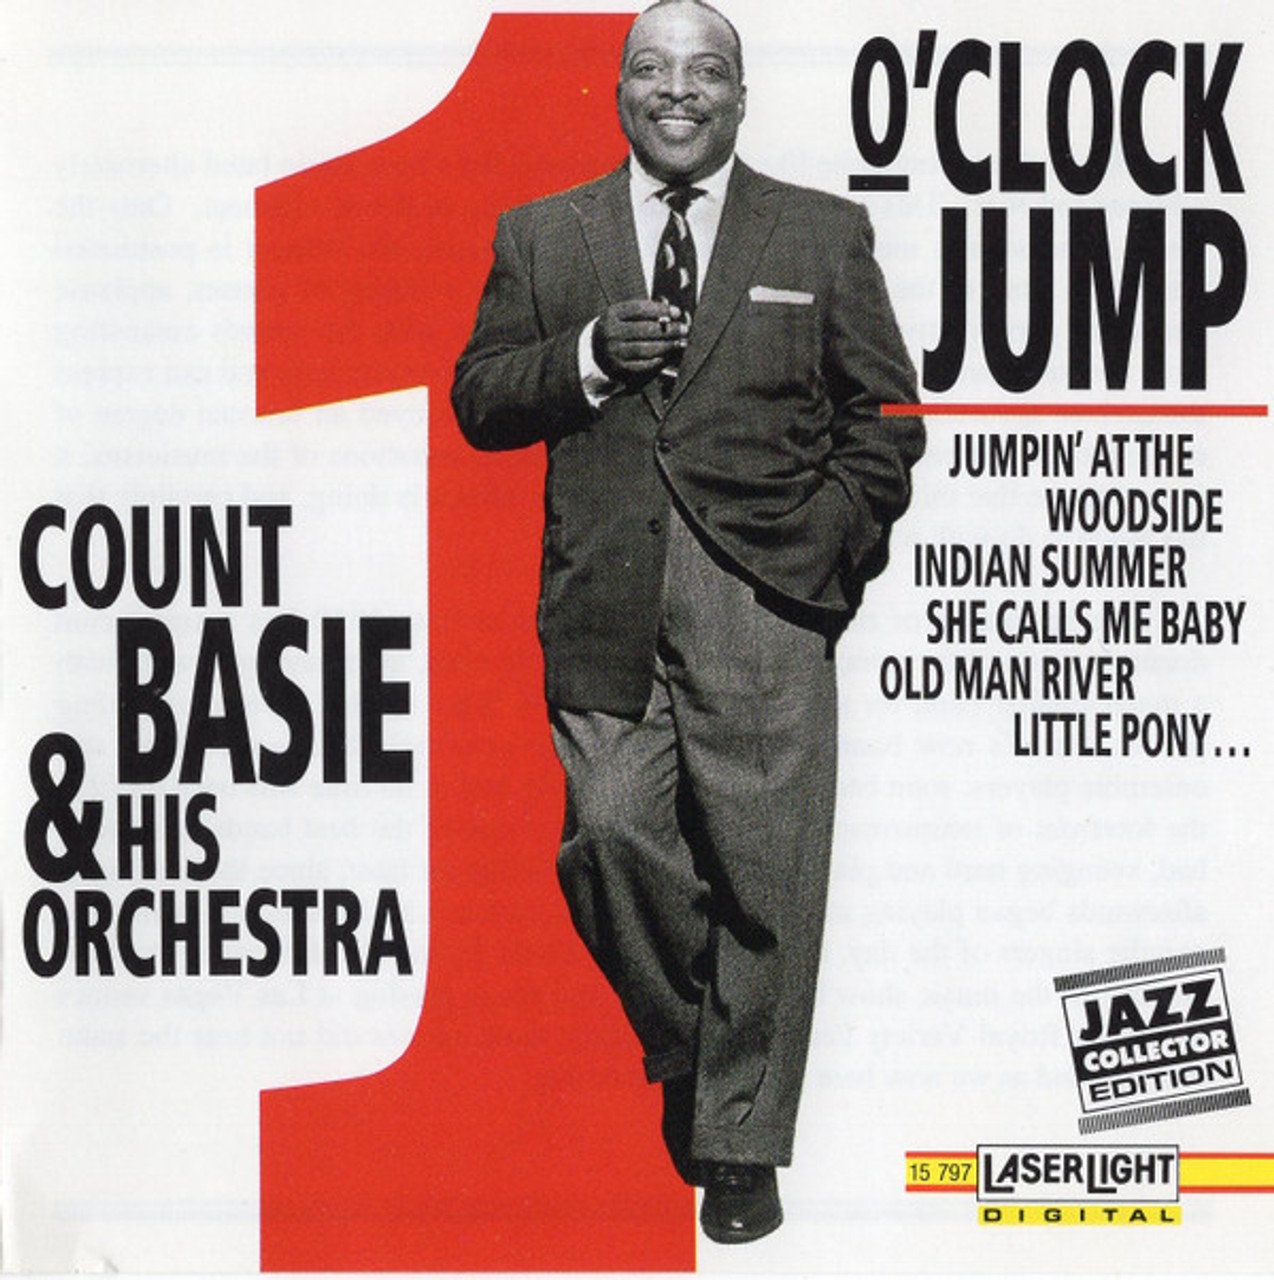 BASIE　COUNT　USED*　COUNT　Music　BASIE　ORCHESTRA　HIS　LIVE　(#018111579728)　Omega